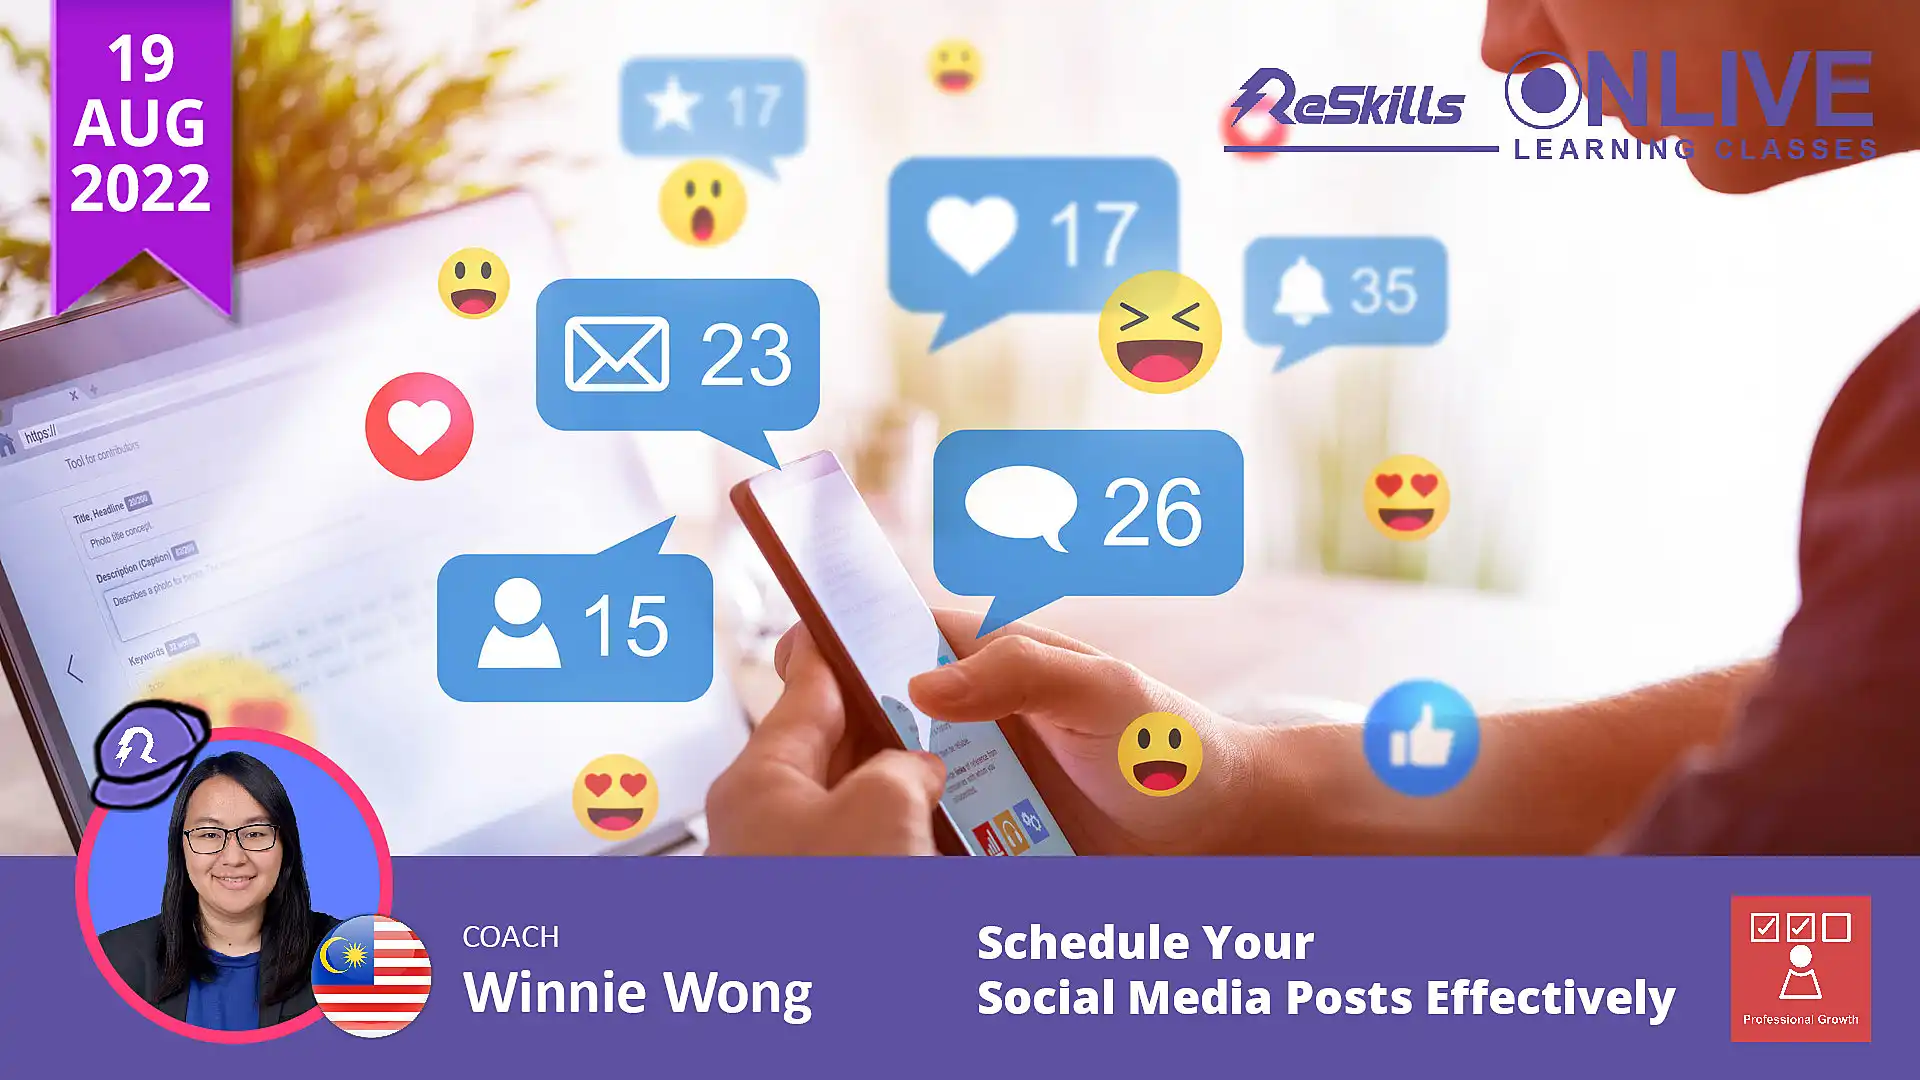 Schedule Your Social Media Posts Effectively - ReSkills